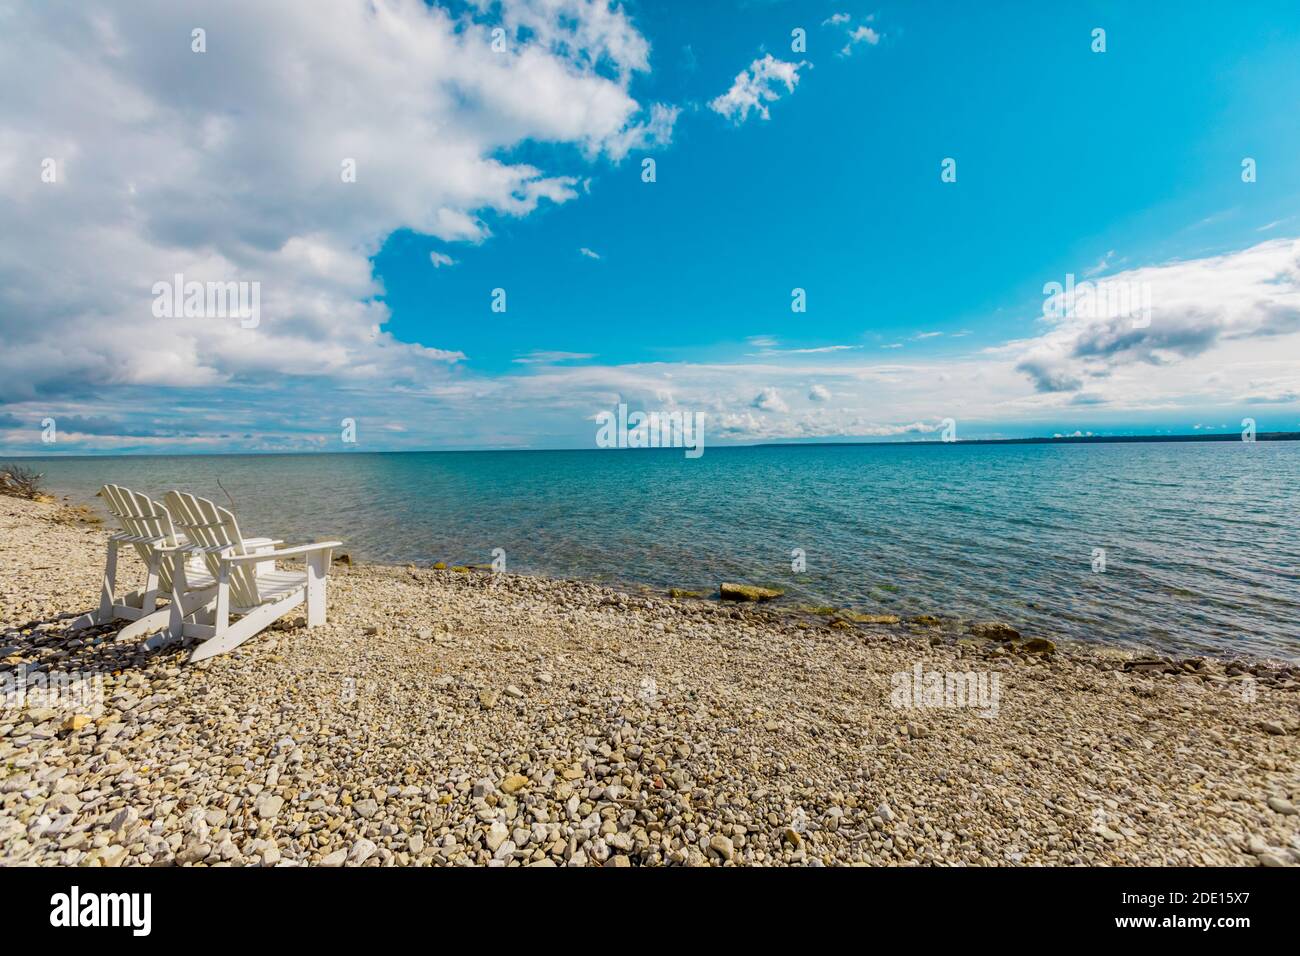 Crystal clear waters and pebbled beaches, Mackinac Island, Michigan, United States of America, North America Stock Photo